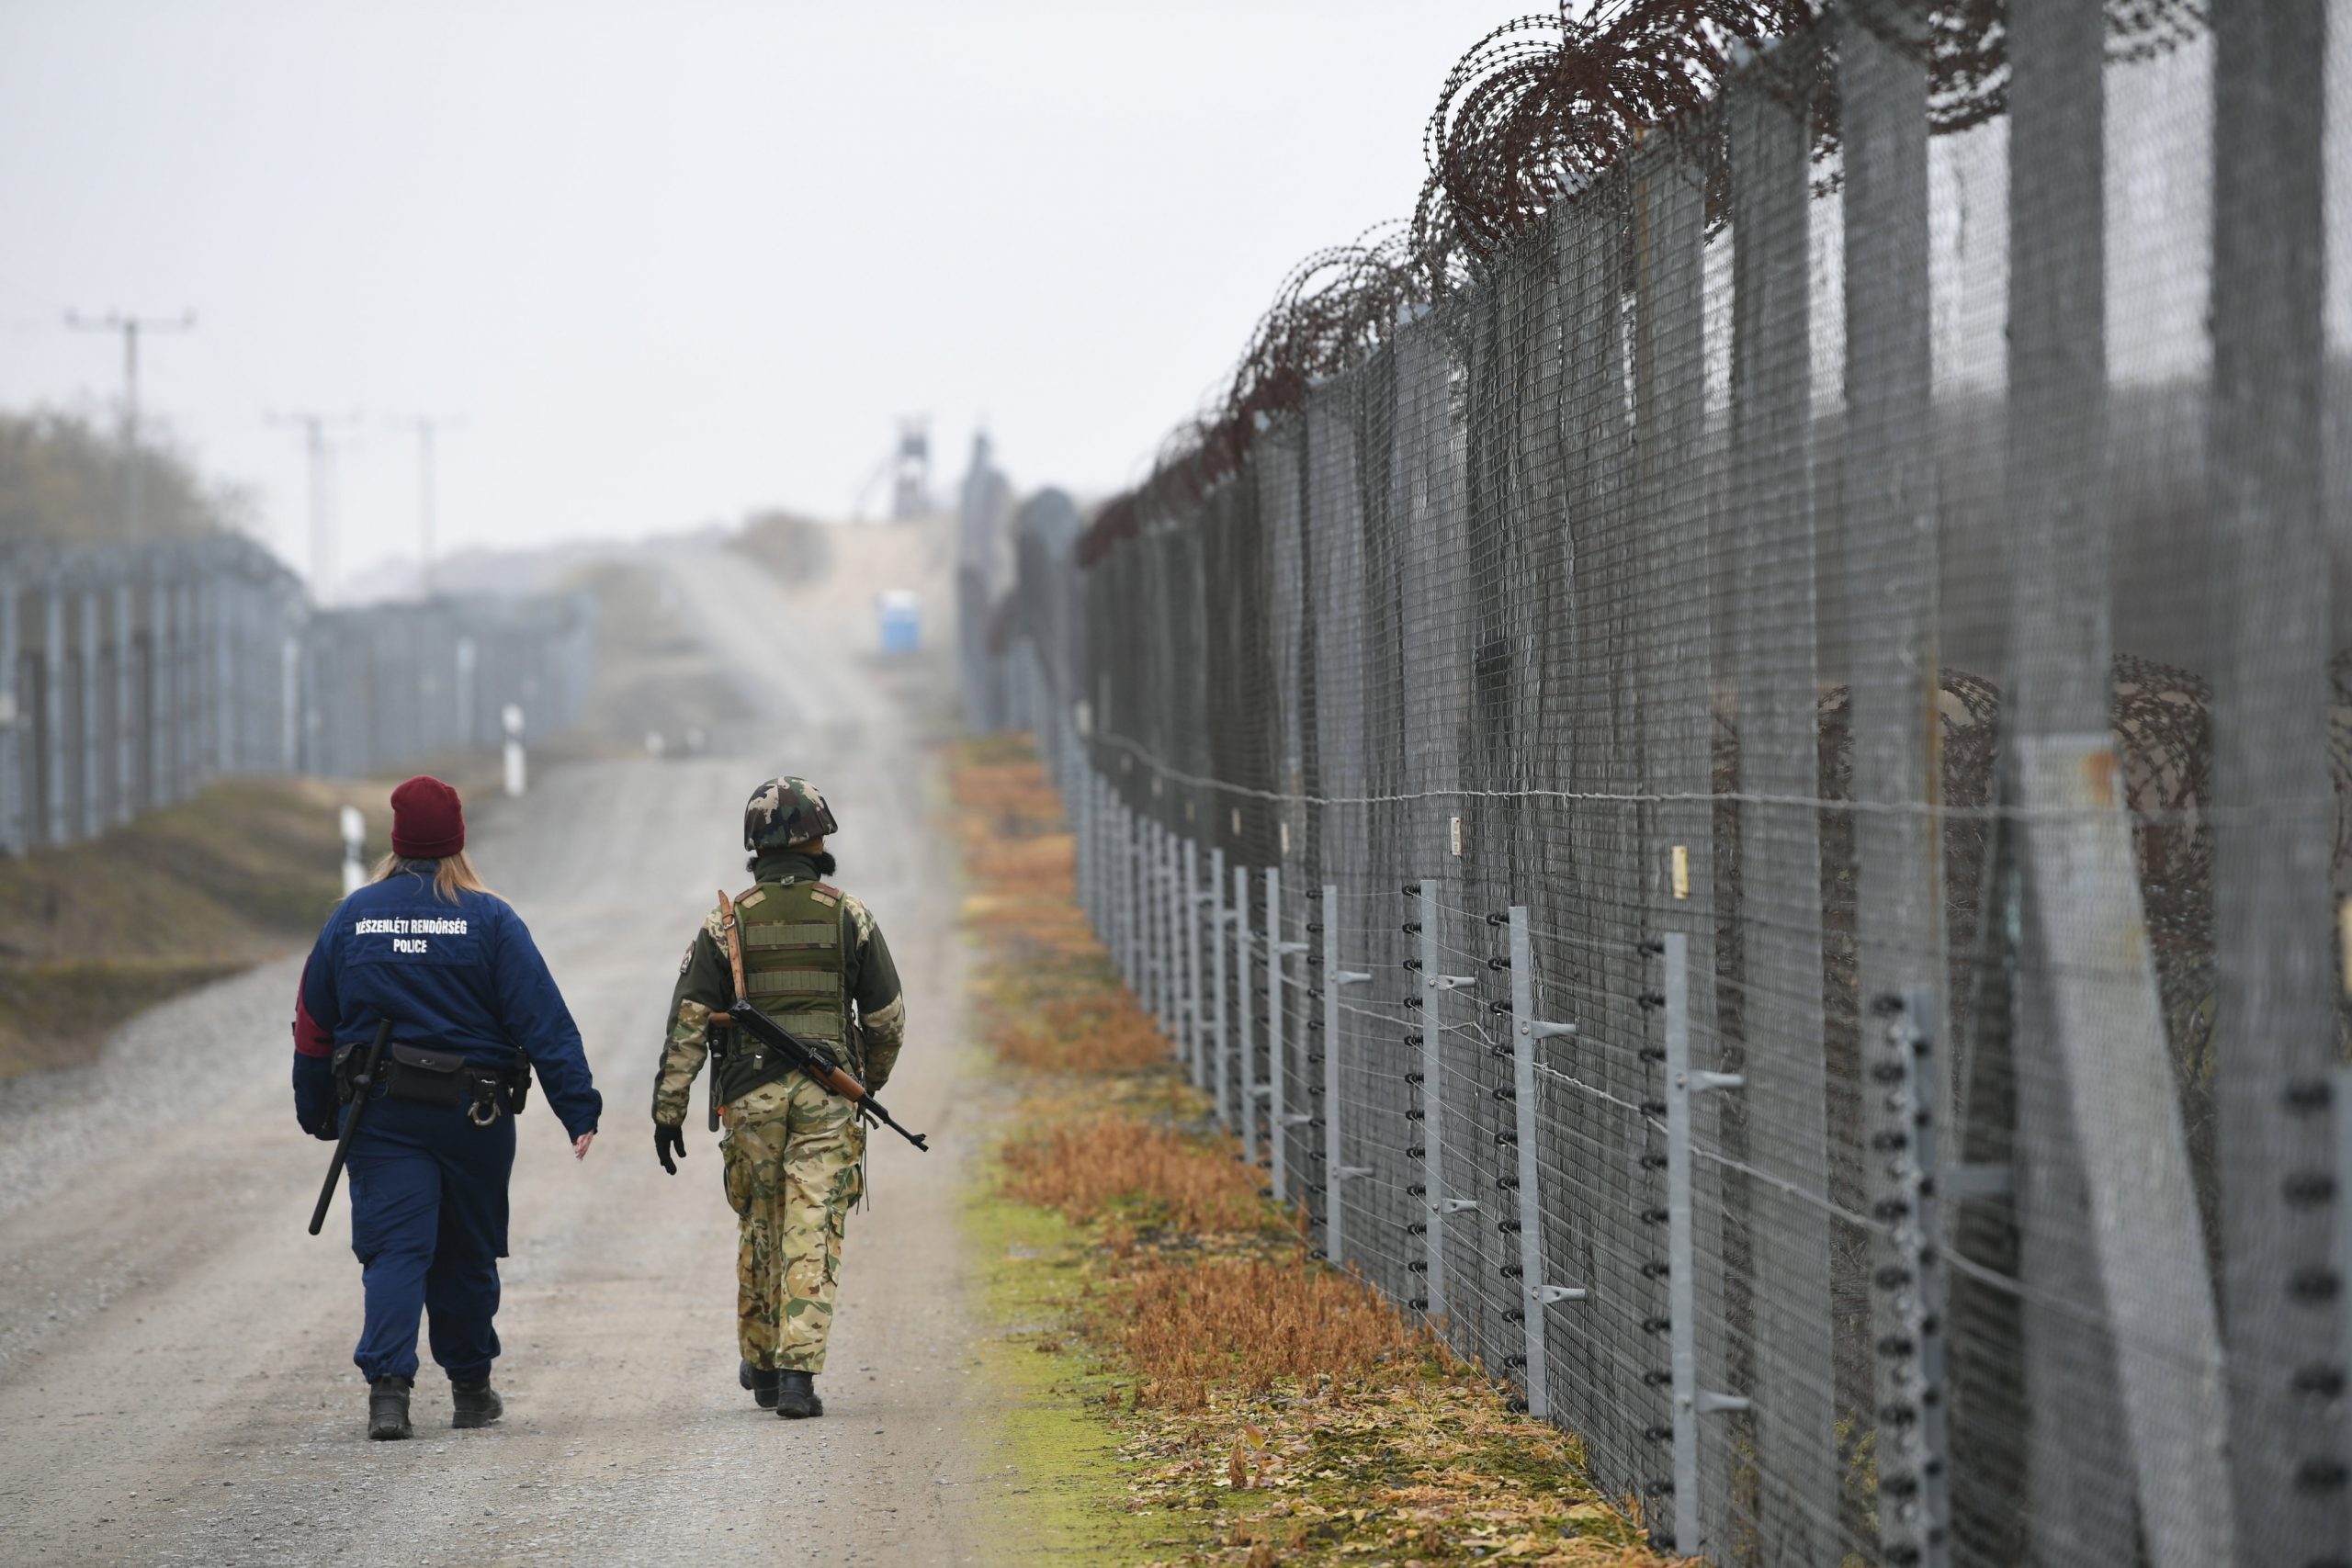 Frontex: Hungarian Border Controls Effective in Reducing Migration